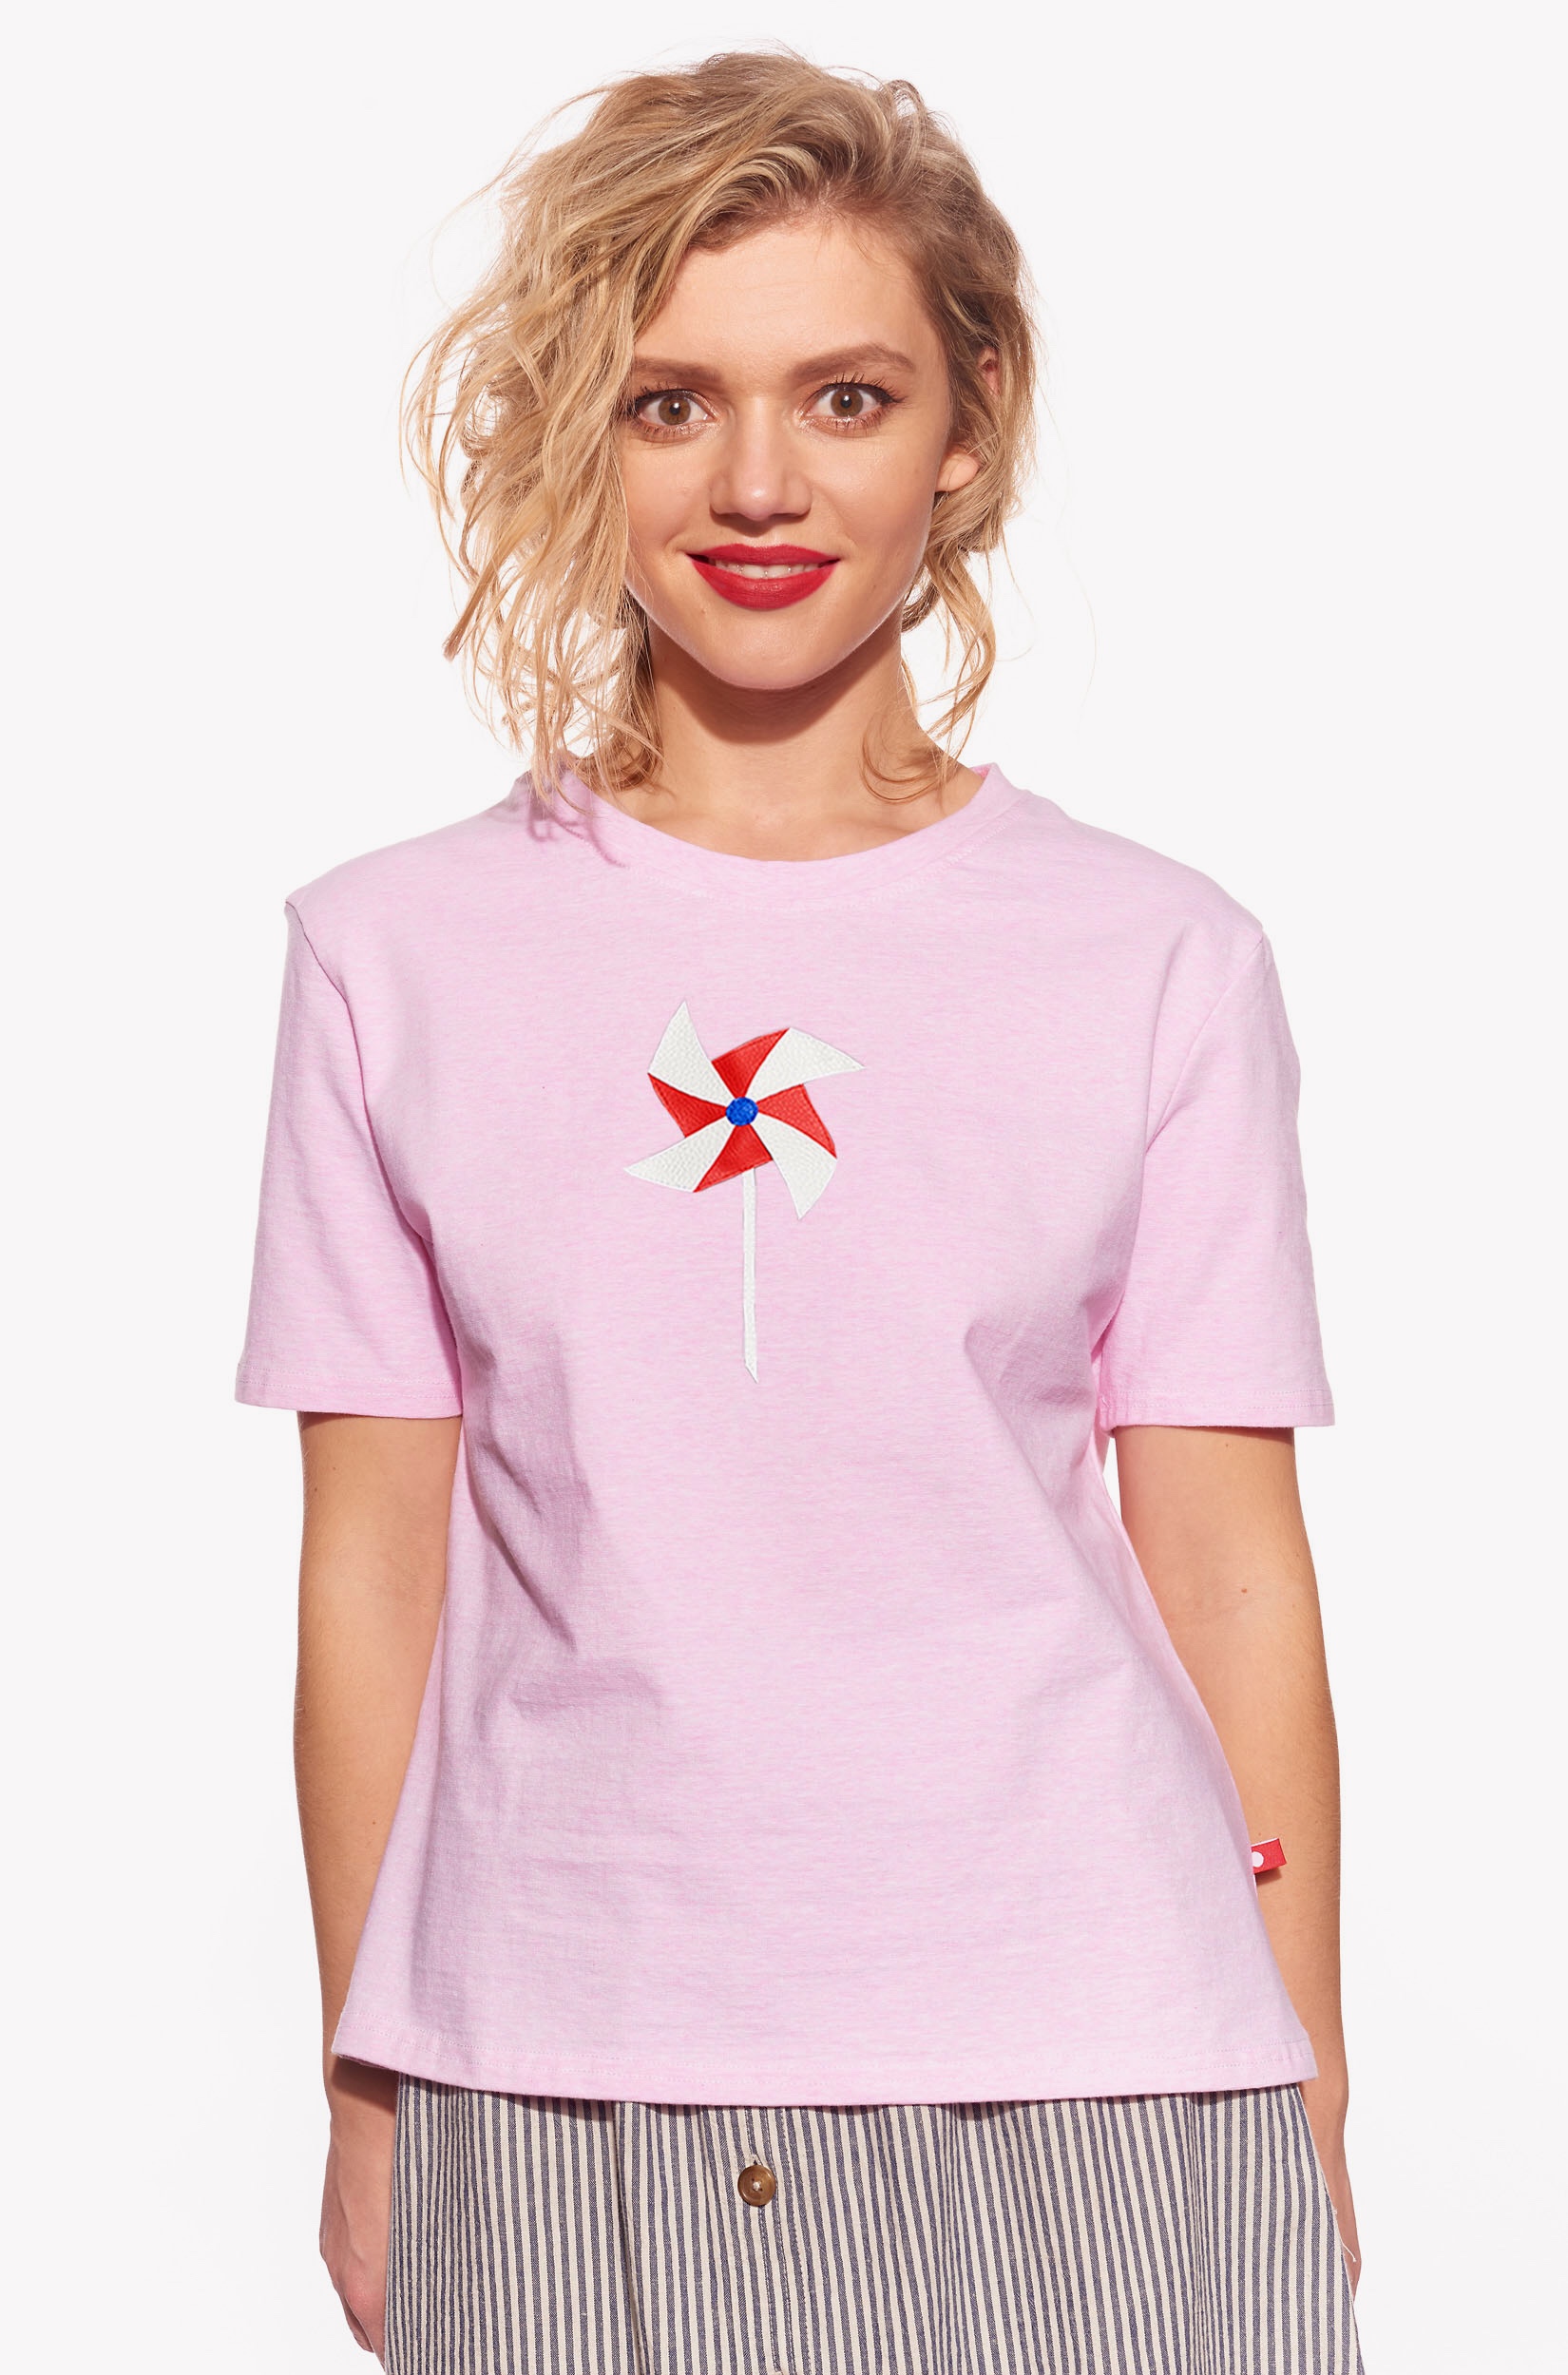 Shirt with paper propeller